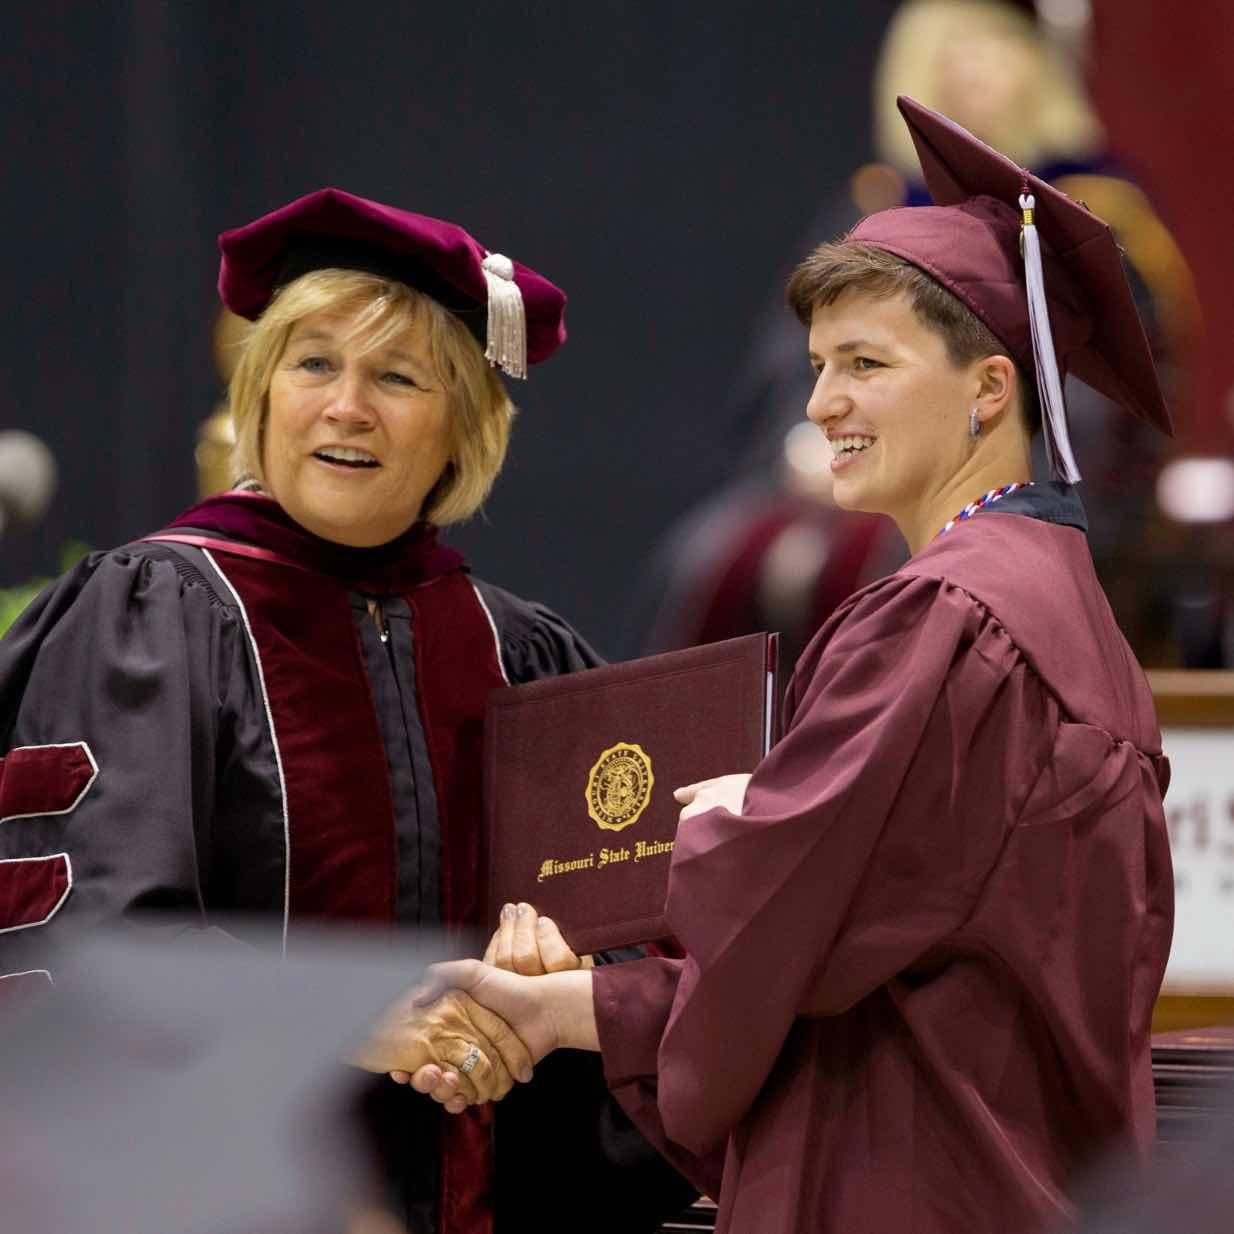 Graduating student shakes hand with faculty memeber while accepting diploma